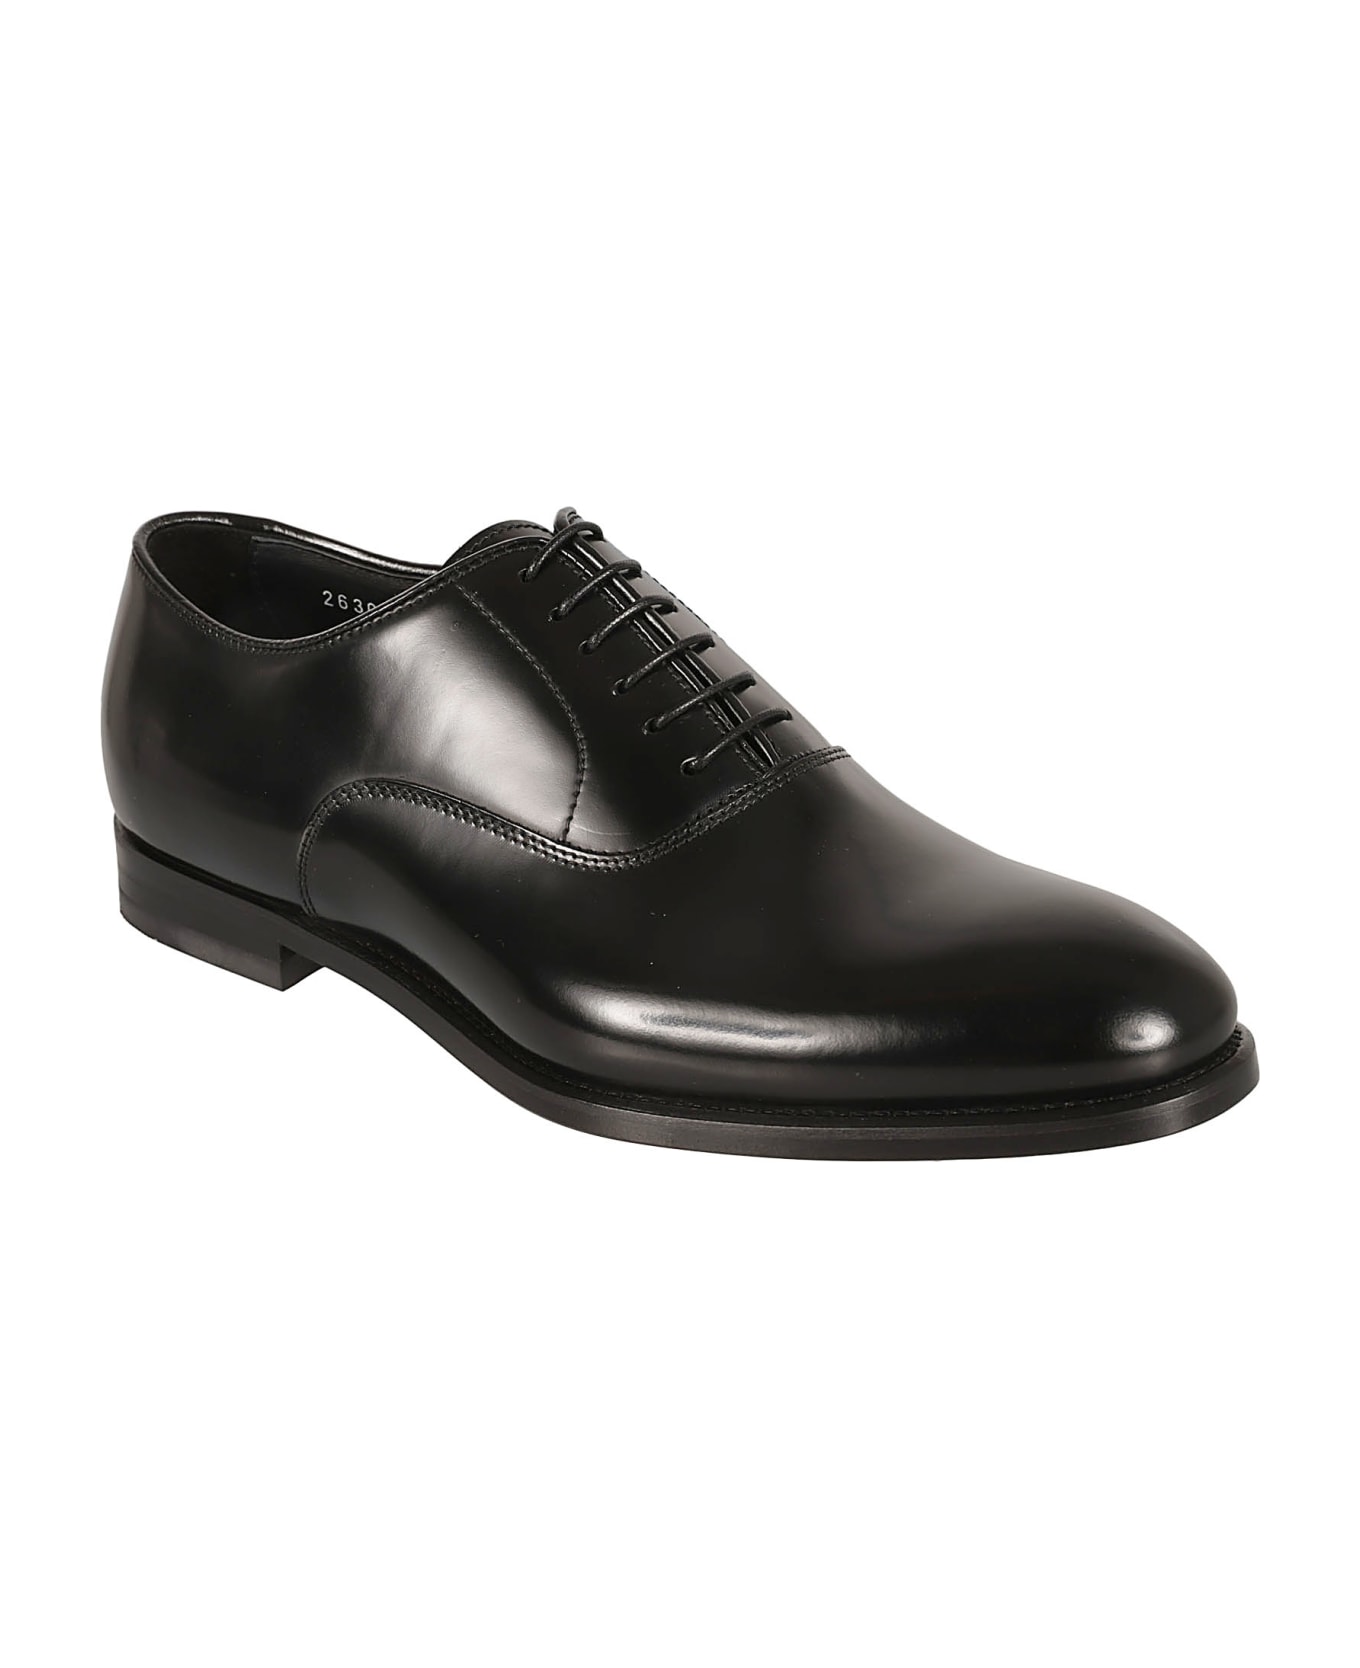 Doucal's Shiny Classic Oxford Shoes - Black